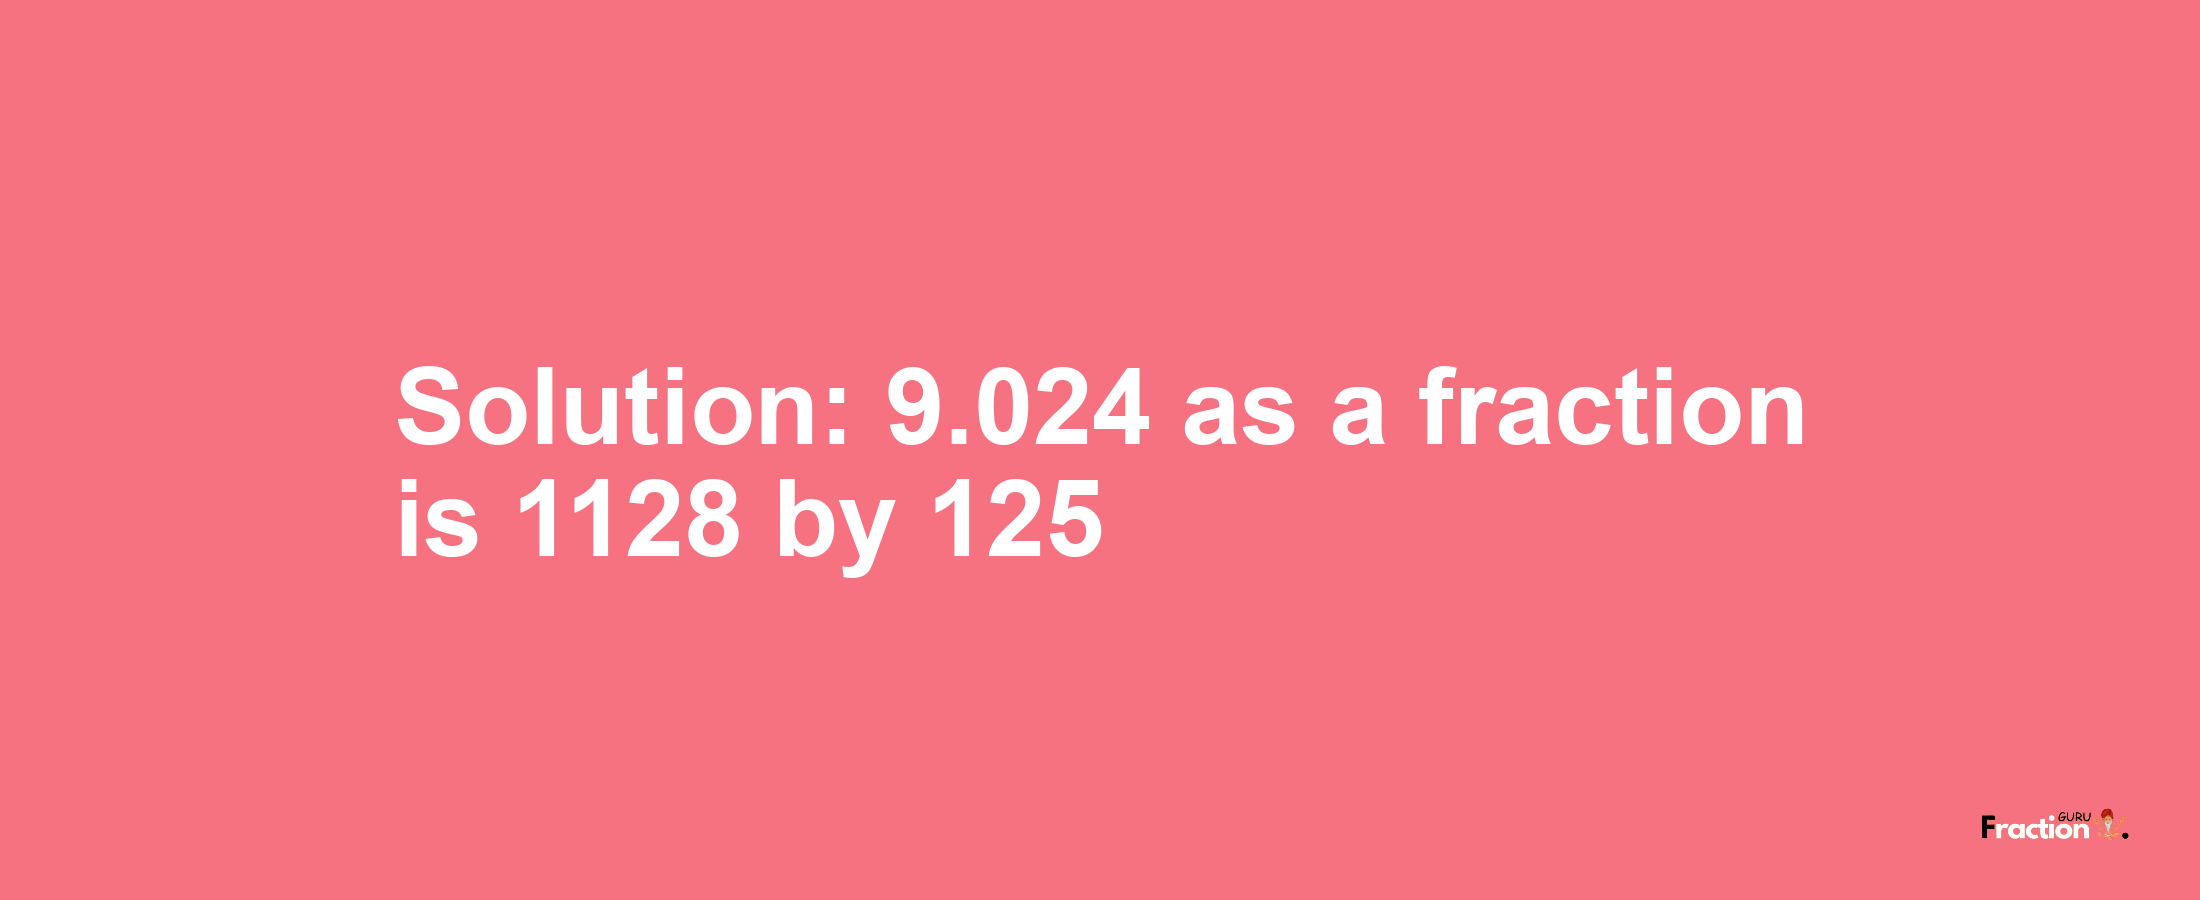 Solution:9.024 as a fraction is 1128/125